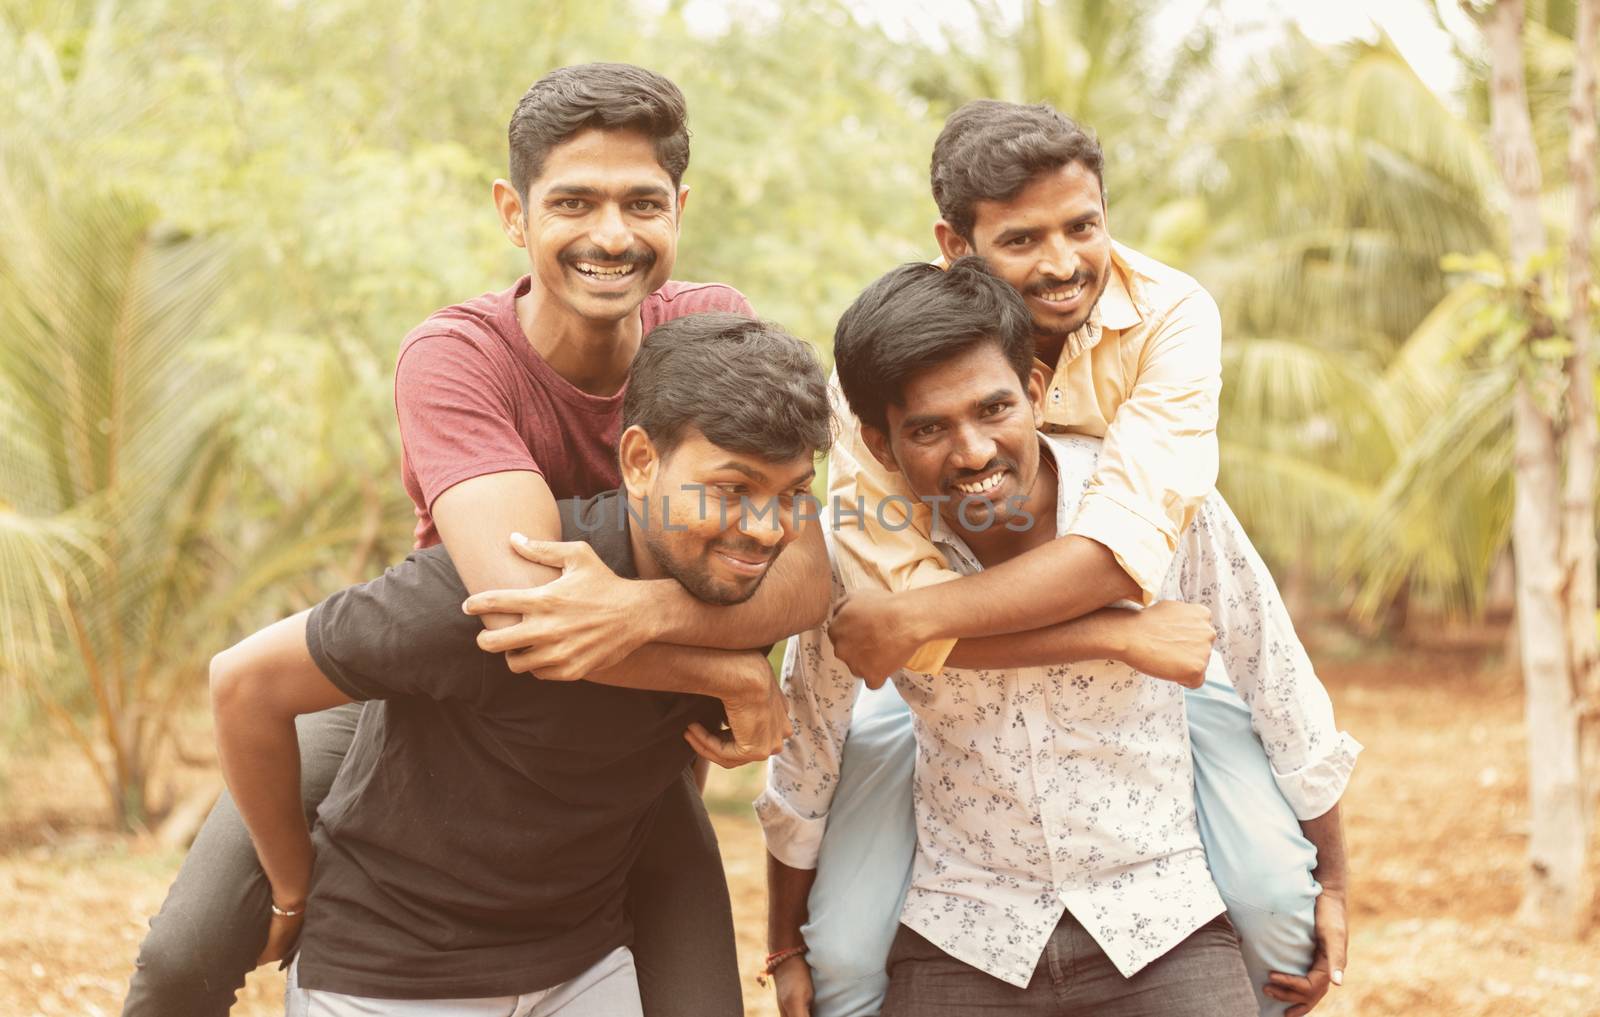 Best male friends Piggyback - Group Of Friends Having Fun Together Outdoors - Cheerful young male friends enjoying time together. by lakshmiprasad.maski@gmai.com